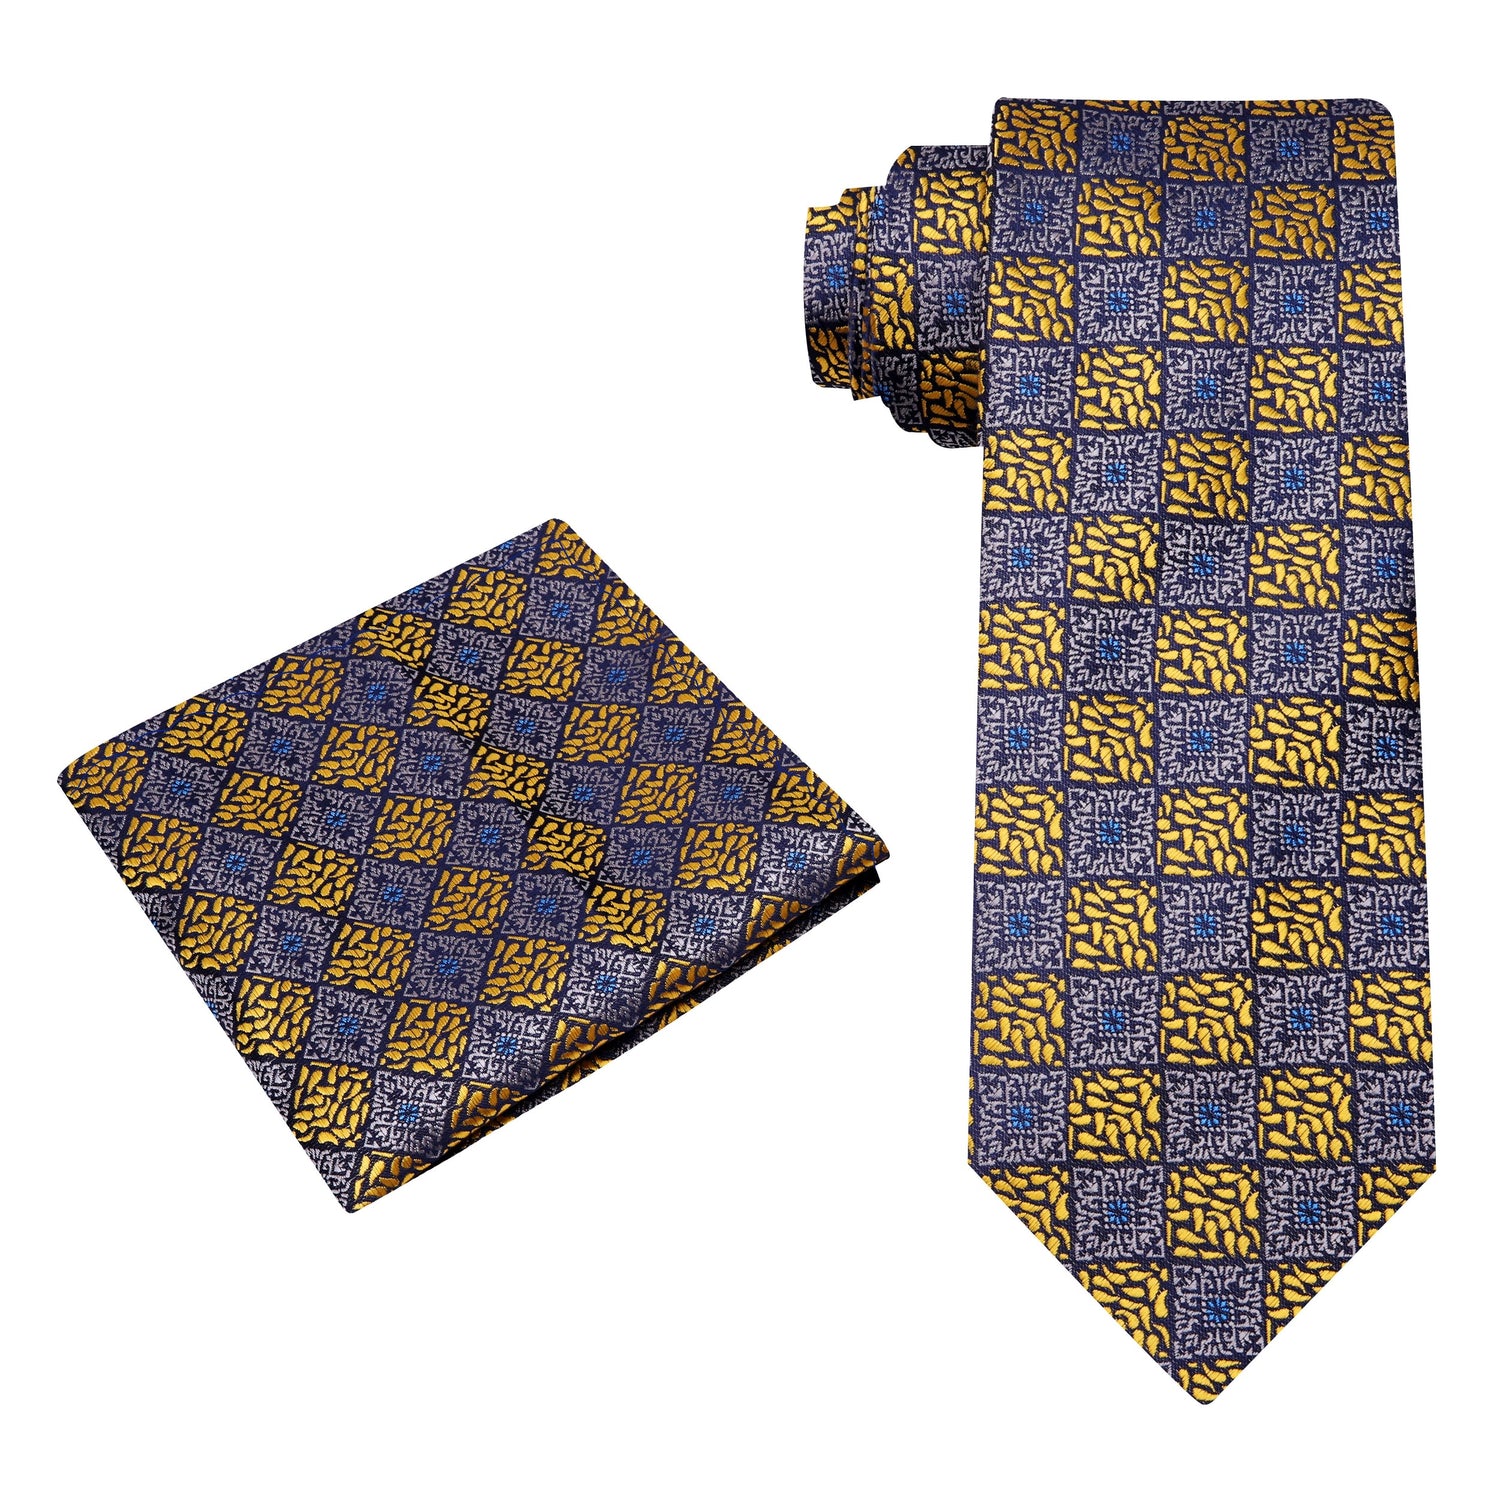 Alt View: Grey and Gold Geometric Necktie and Square